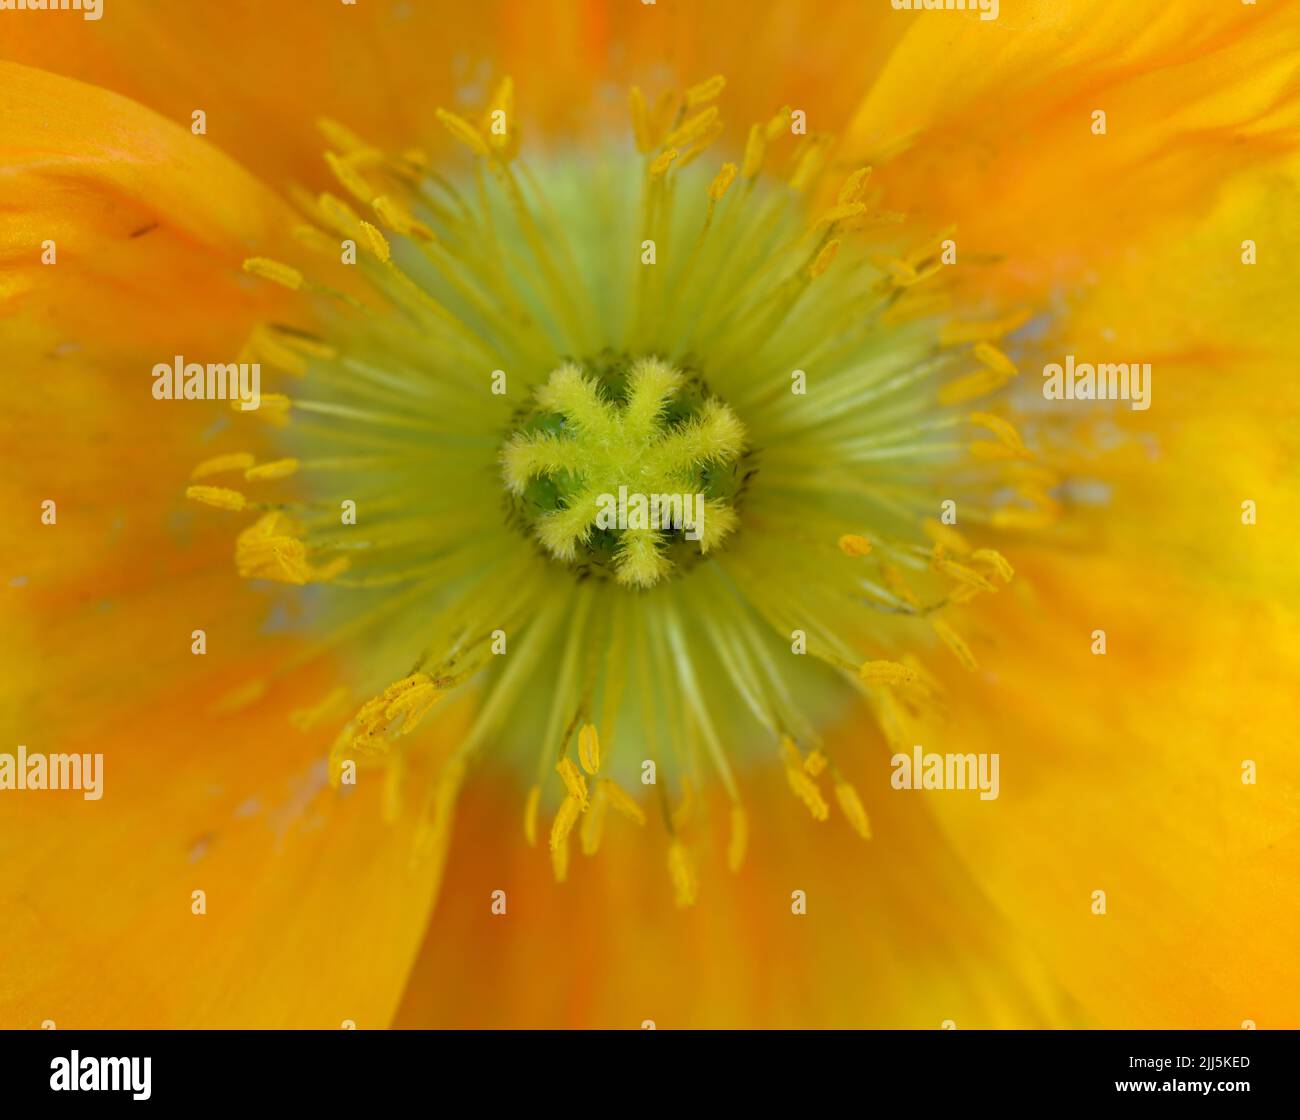 Closeup of an orange and yellow poppy flower (Papaver) showing detail of stamens, anthers, and seedpod. Stock Photo